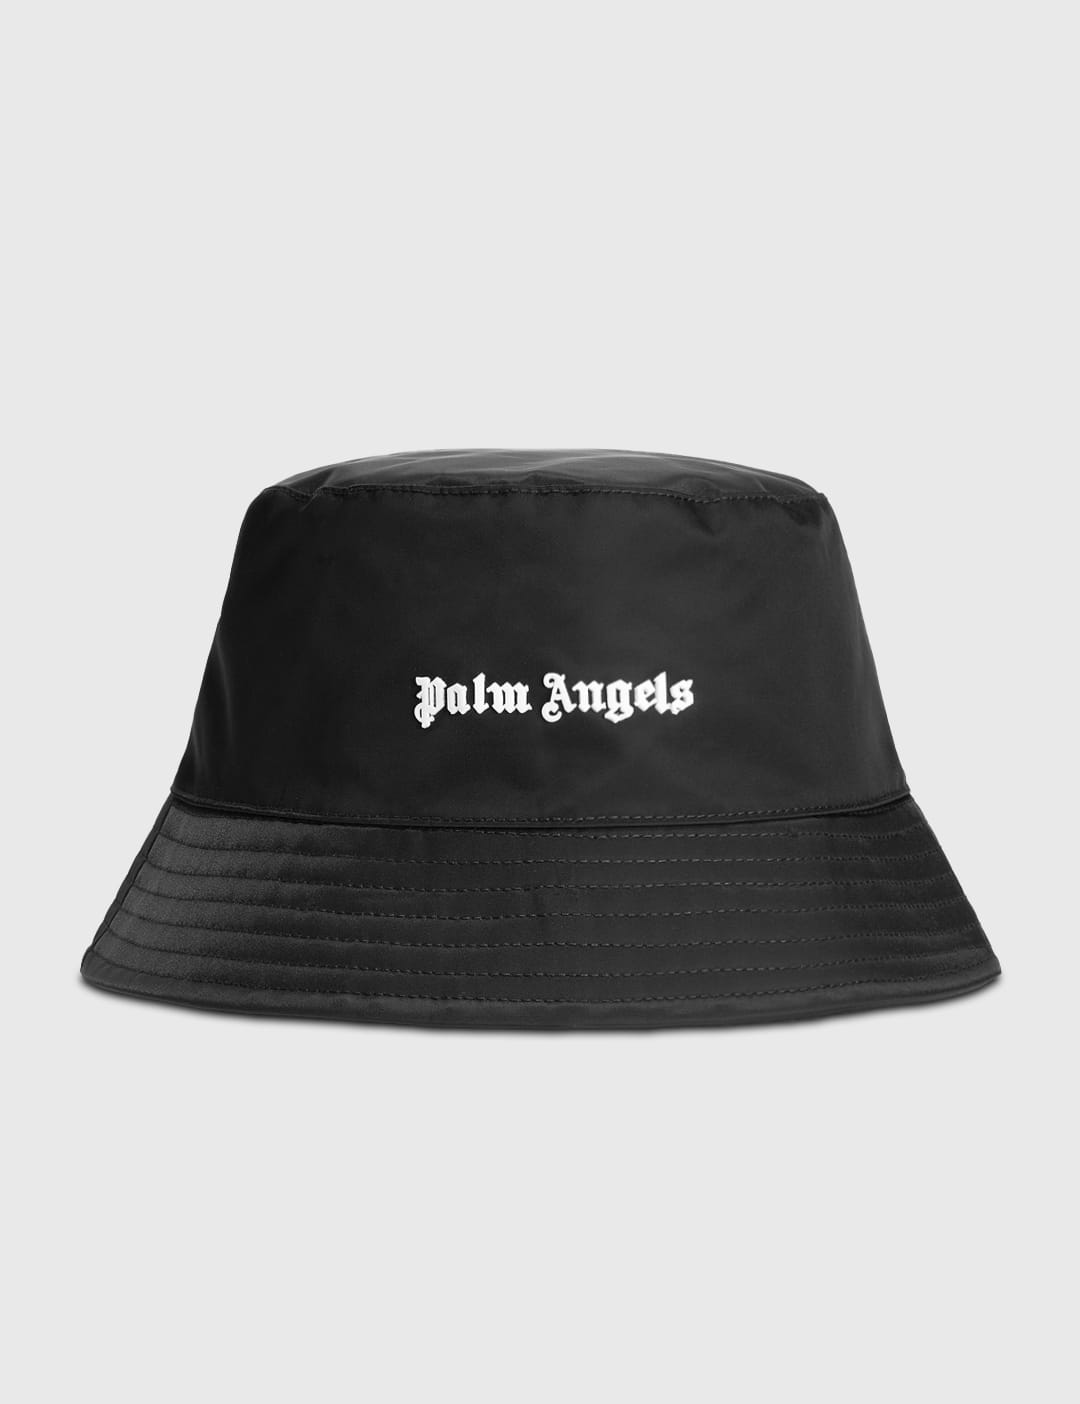 Palm Angels - Classic Logo Bucket Hat | HBX - Globally Curated 